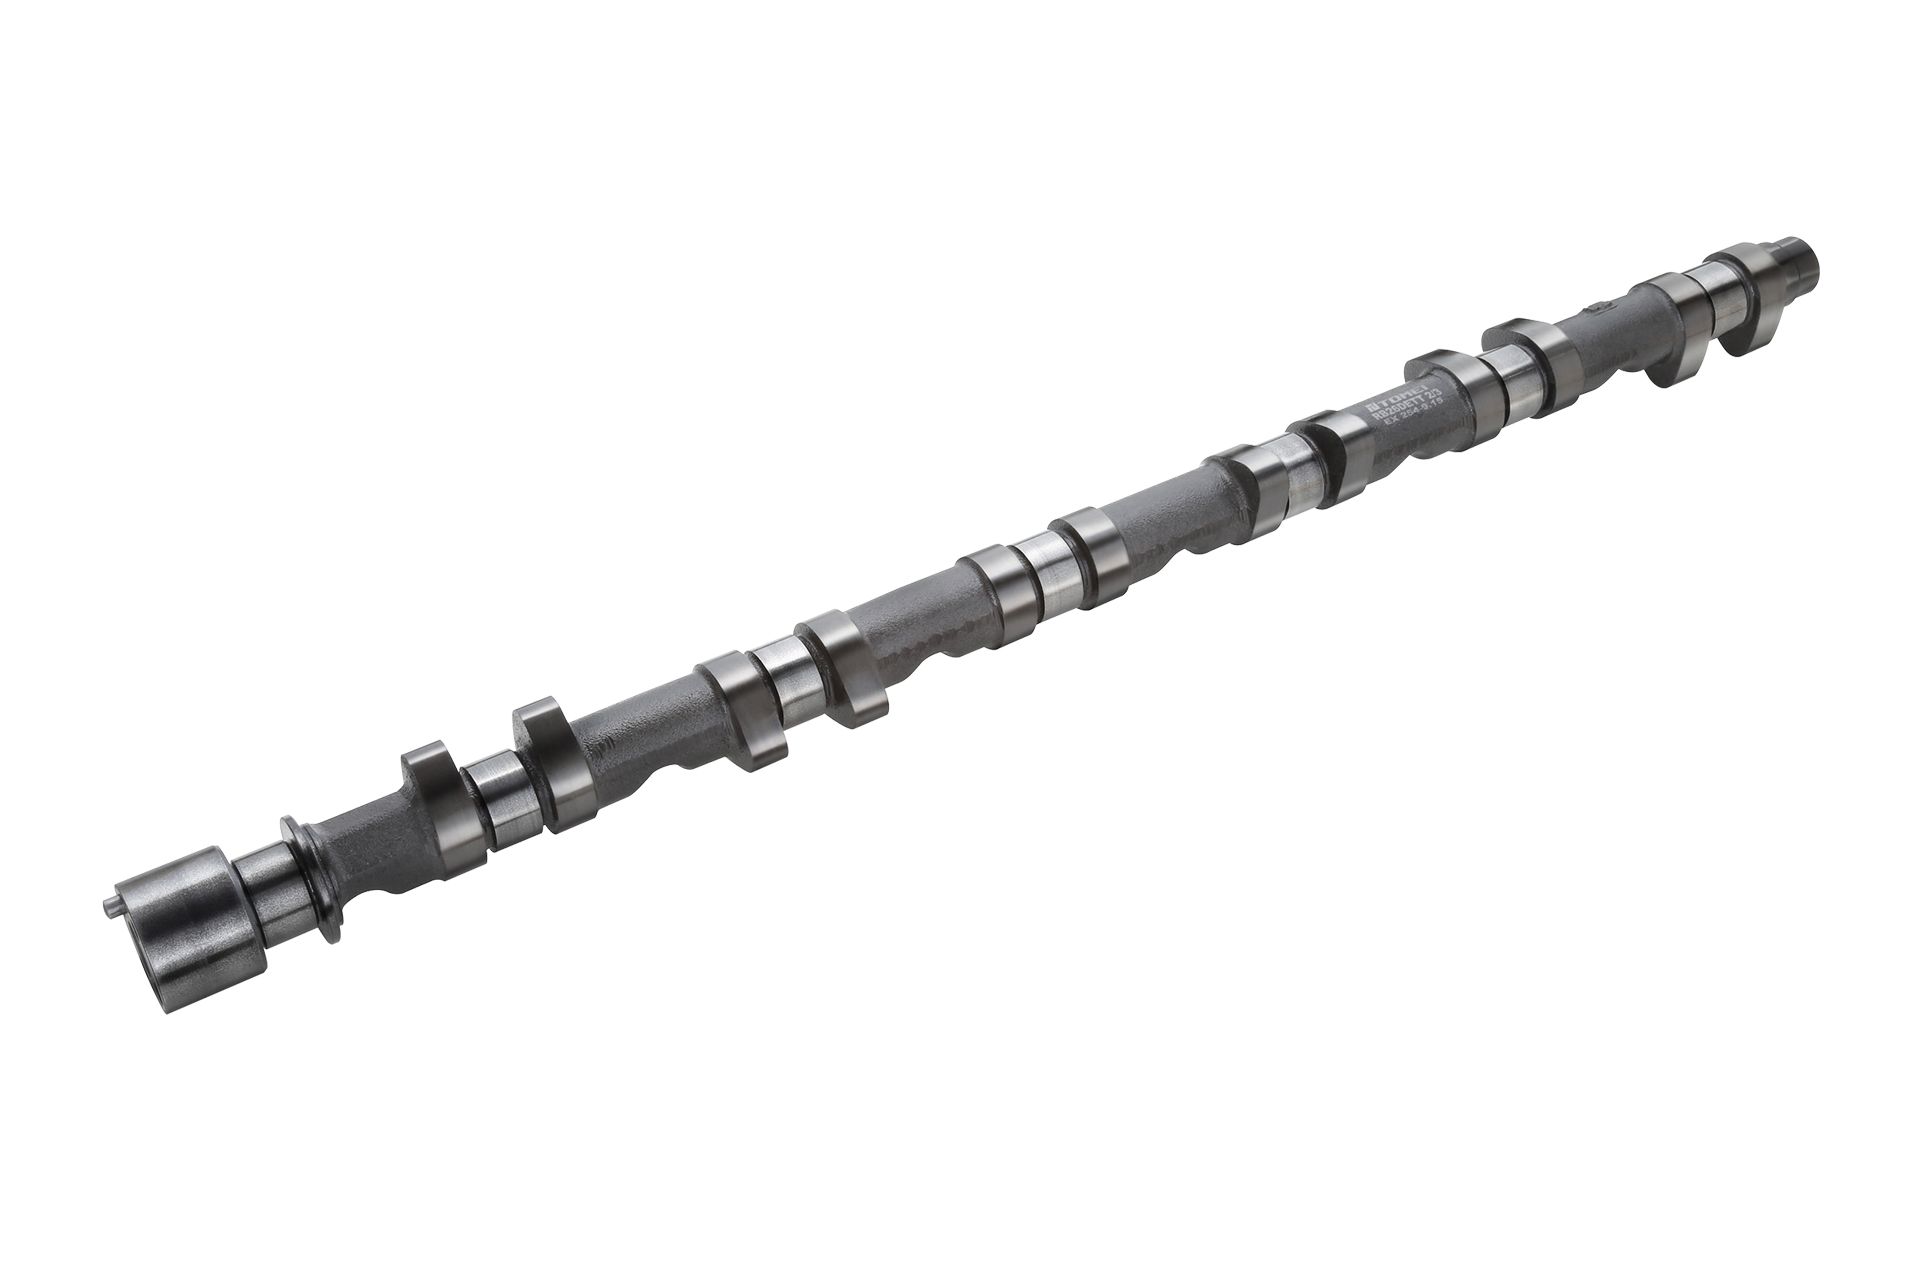 Tomei Camshaft Procam Exhaust 270-10.25mm Solid, RB25DE(T) Late Model Series 2 - Nissan Skyline GTS R33